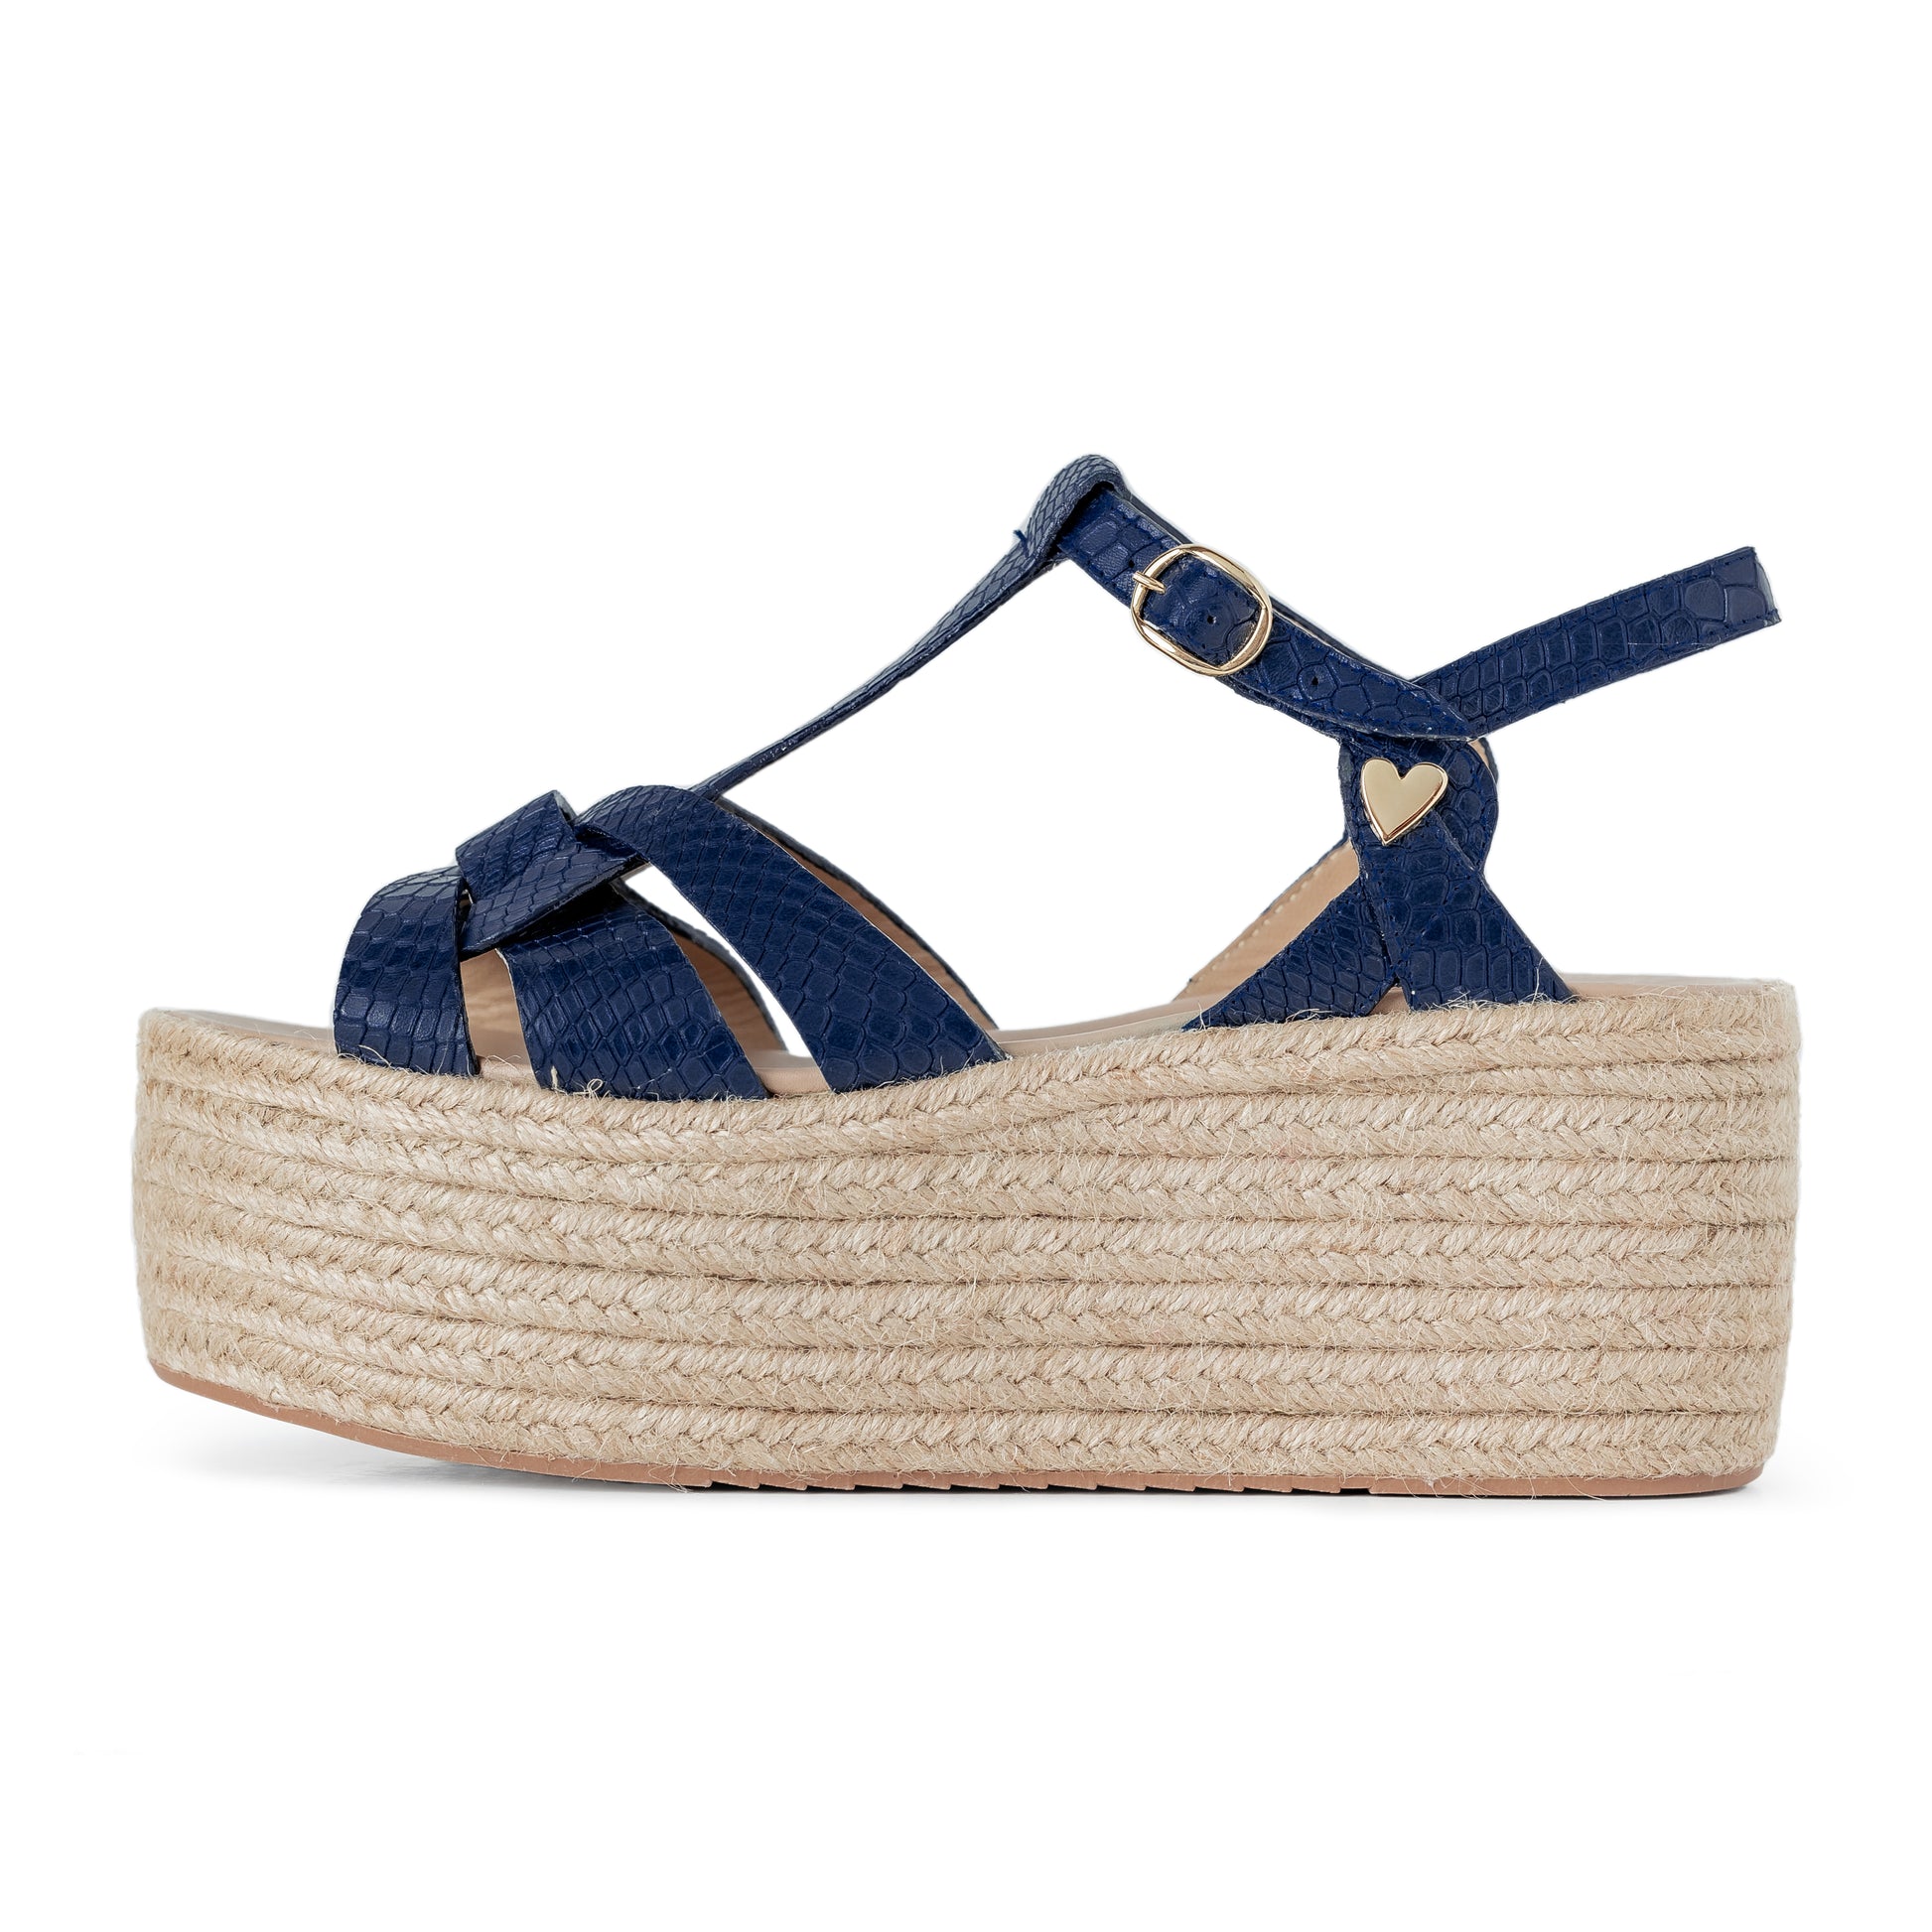 Get ready to rock your new CAMERON ESPADRILLES, just by adding a few inches and looking amazing and chic for your day! FEATURES Its base is lined in natural jute Genuine Leather on the upper and back Insole made of genuine leather. Handmade 3 inch heel weight 2.5 inch platform